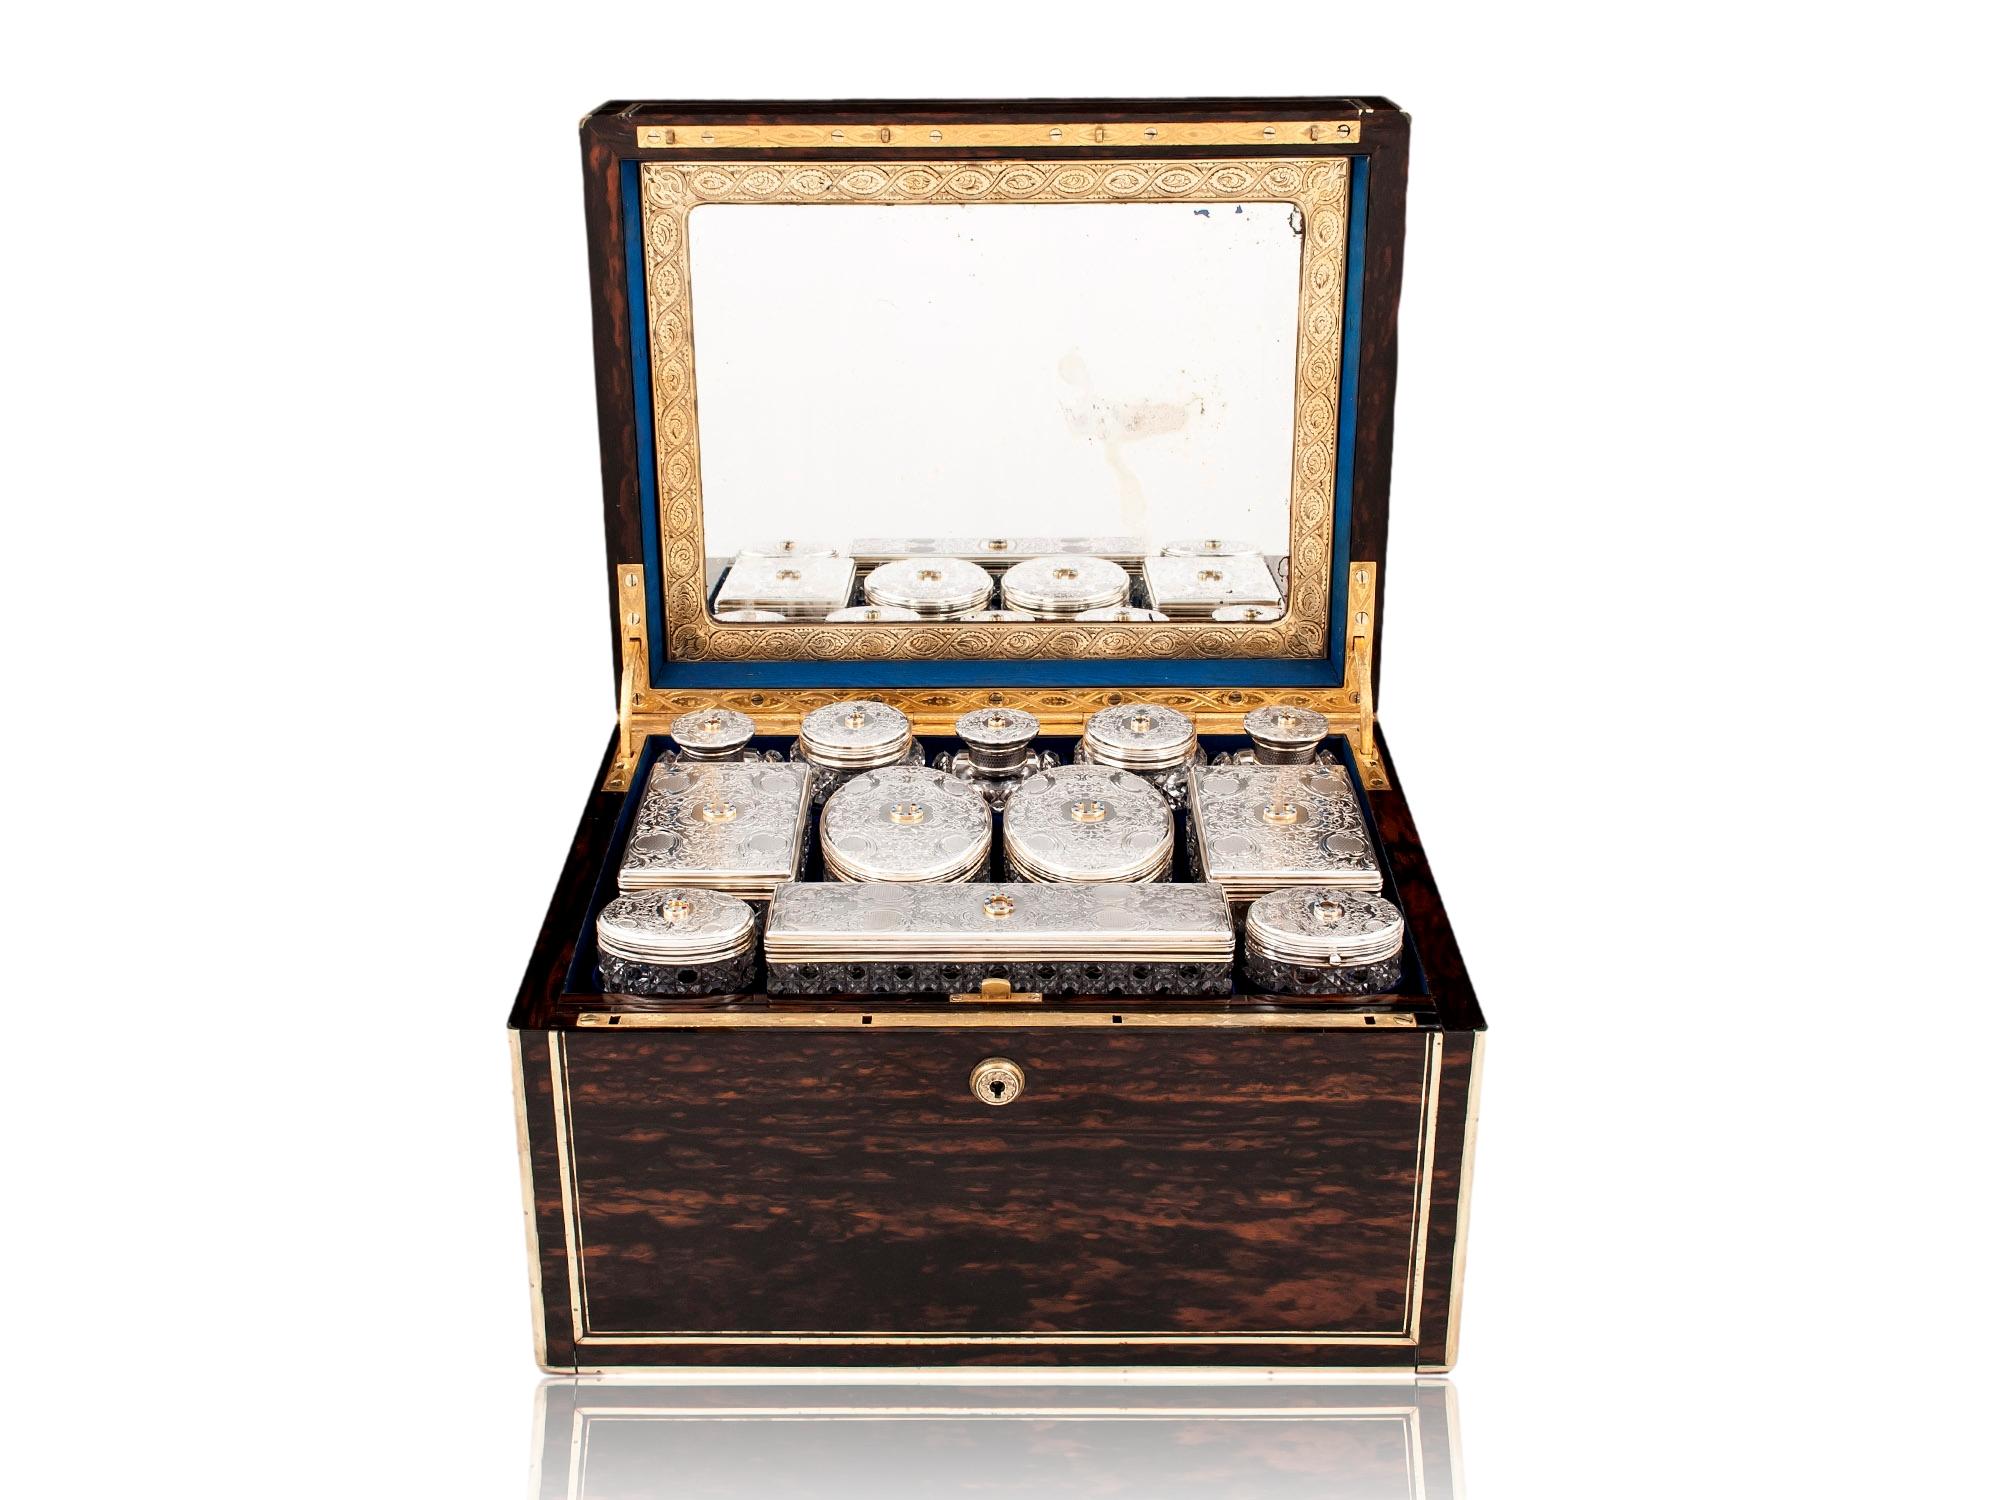 Dating to 1857 hallmarks for James Vickery and makers plaque Henry Lewis

From our Vanity Box collection, we are delighted to offer this exceptional Victorian Coromandel Vanity Box from the Glyn Cywarch Estate. The box veneered in exotic Coromandel